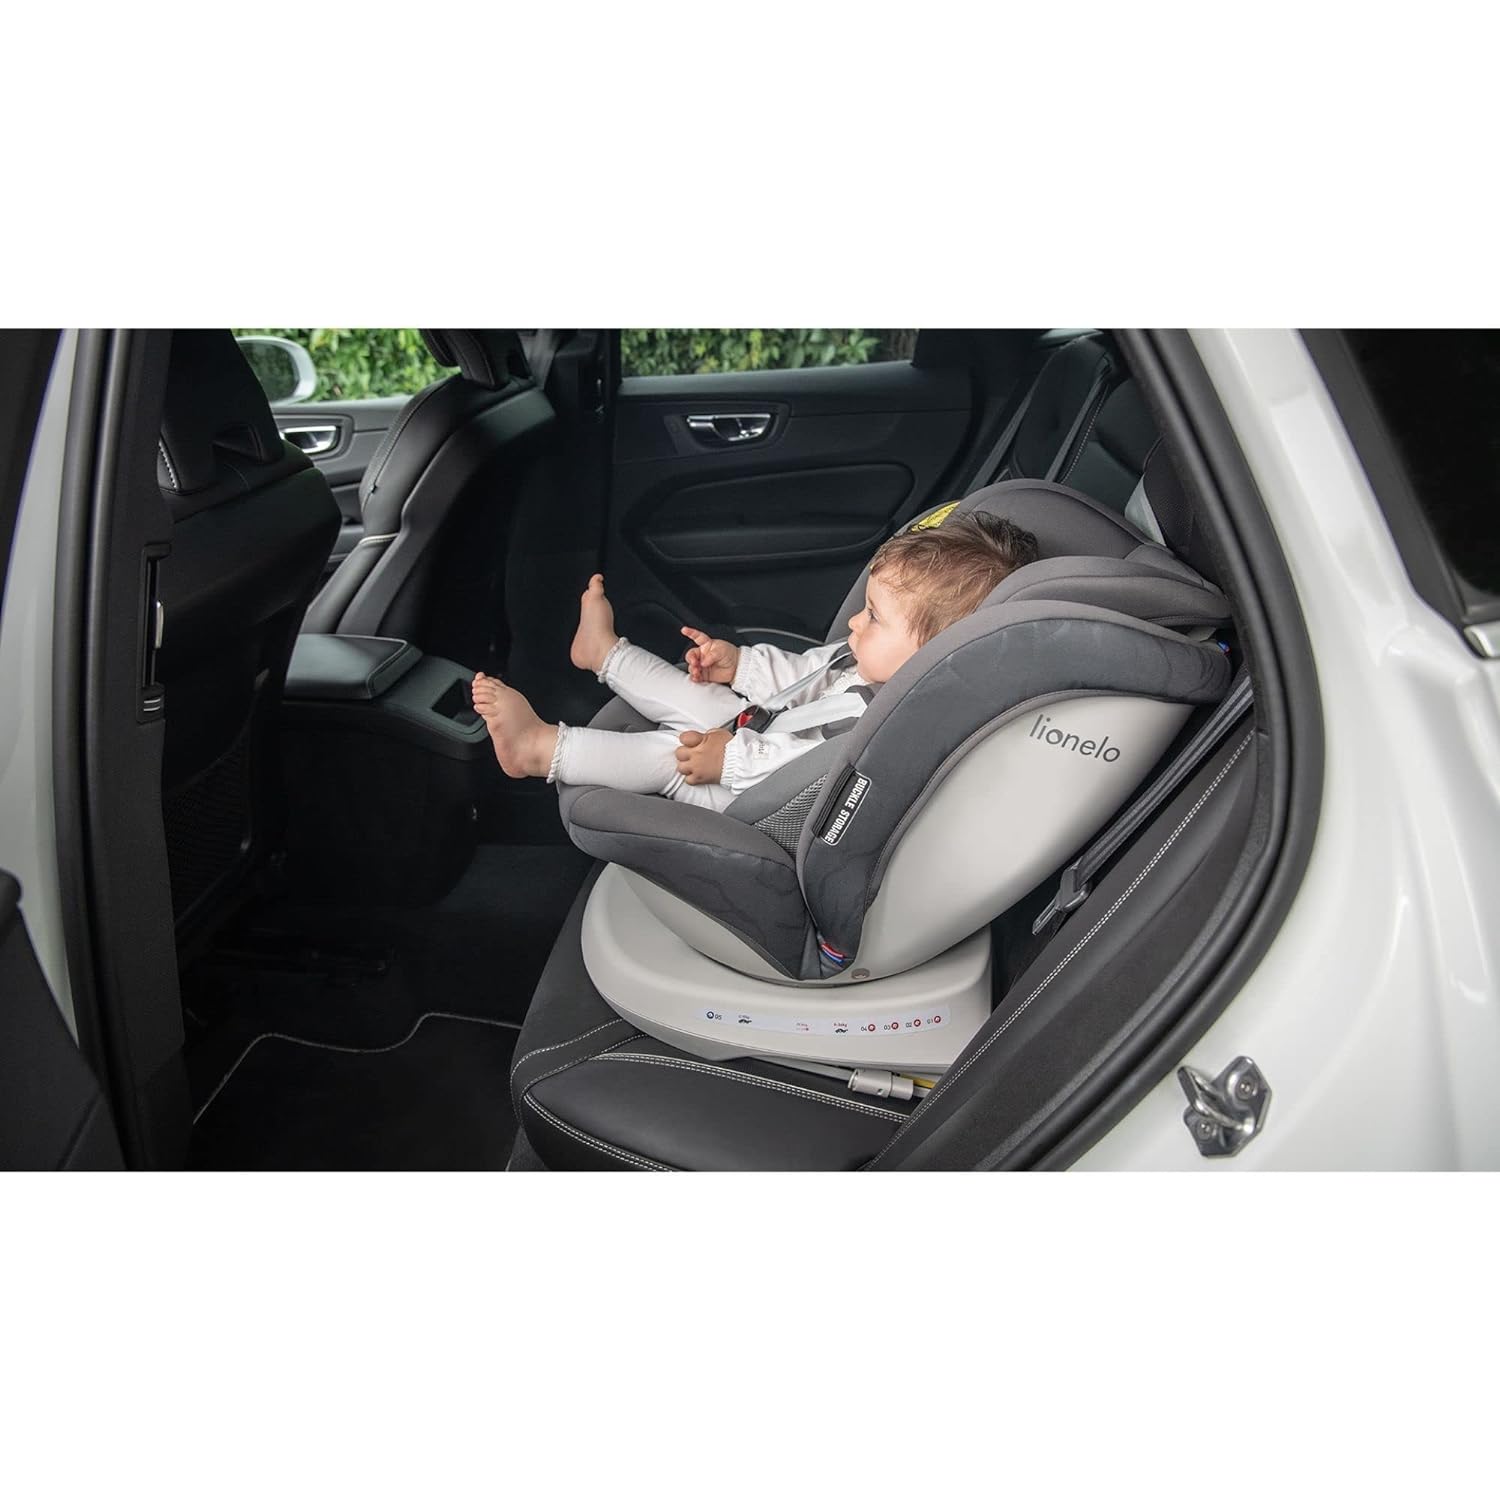 LIONELO Bastiaan One Child Seat from Birth 0-36 kg Isofix Top Tether 360 Degree Rotating Backwards Forward Side Protection 5-Point Seat Belts Dri-Seat (Black)